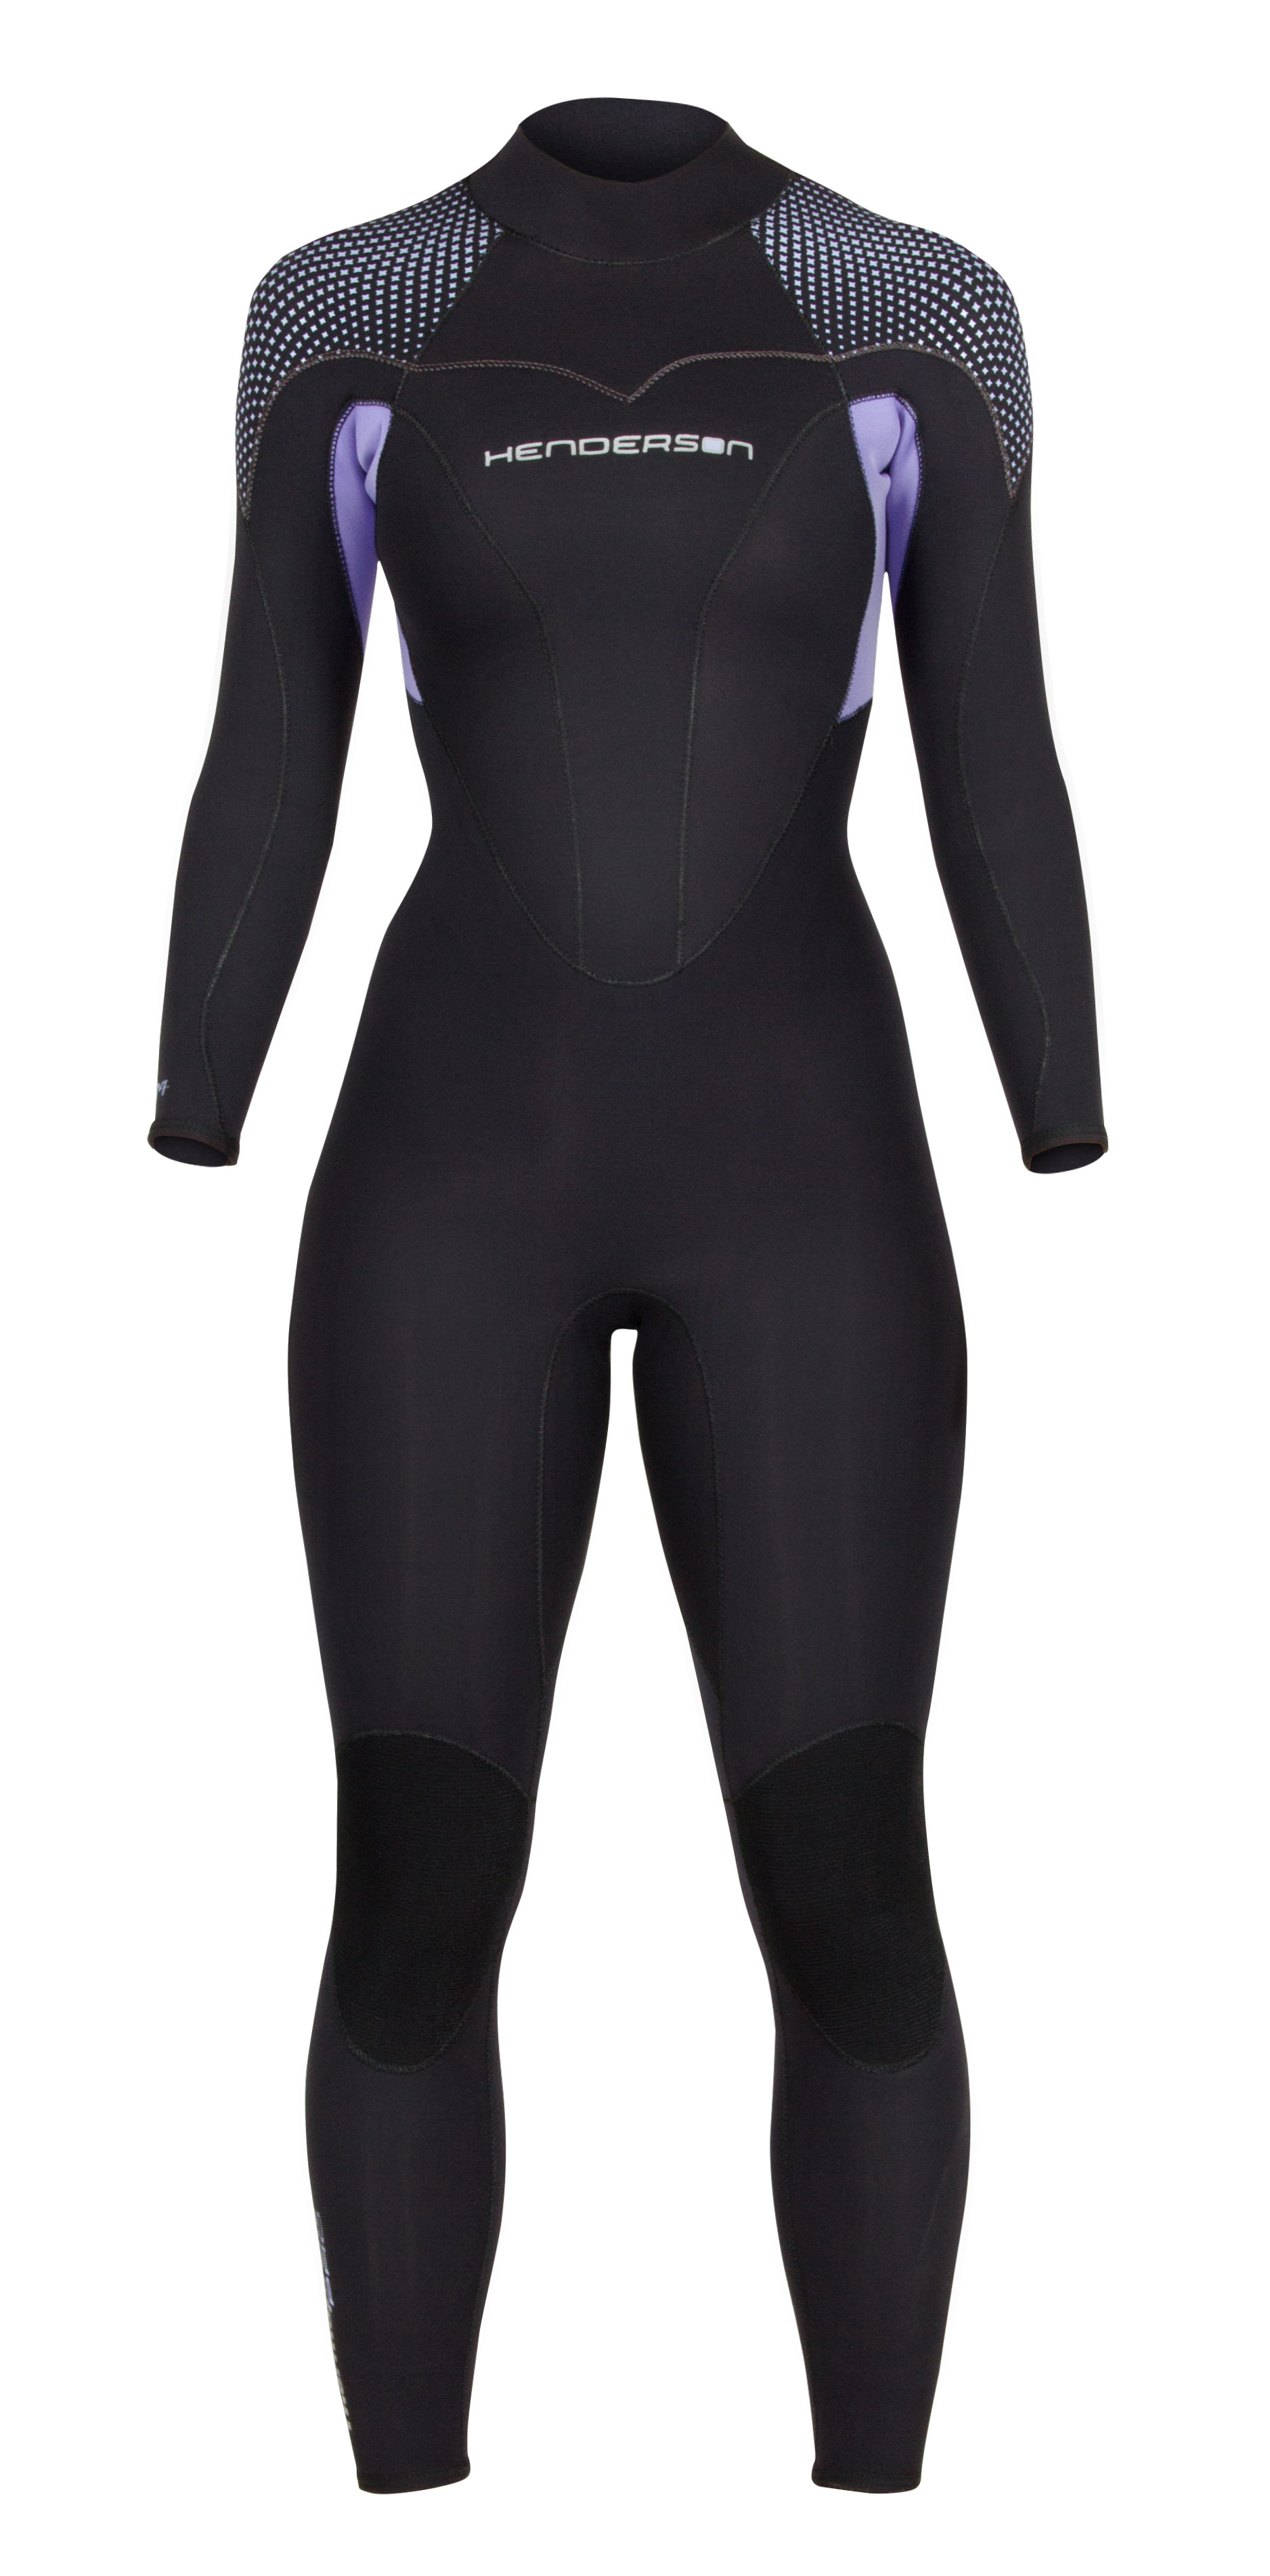 XL 5210 TommyDSports Comfort Stretch Series Women's 5mm Front Zip Wetsuit 